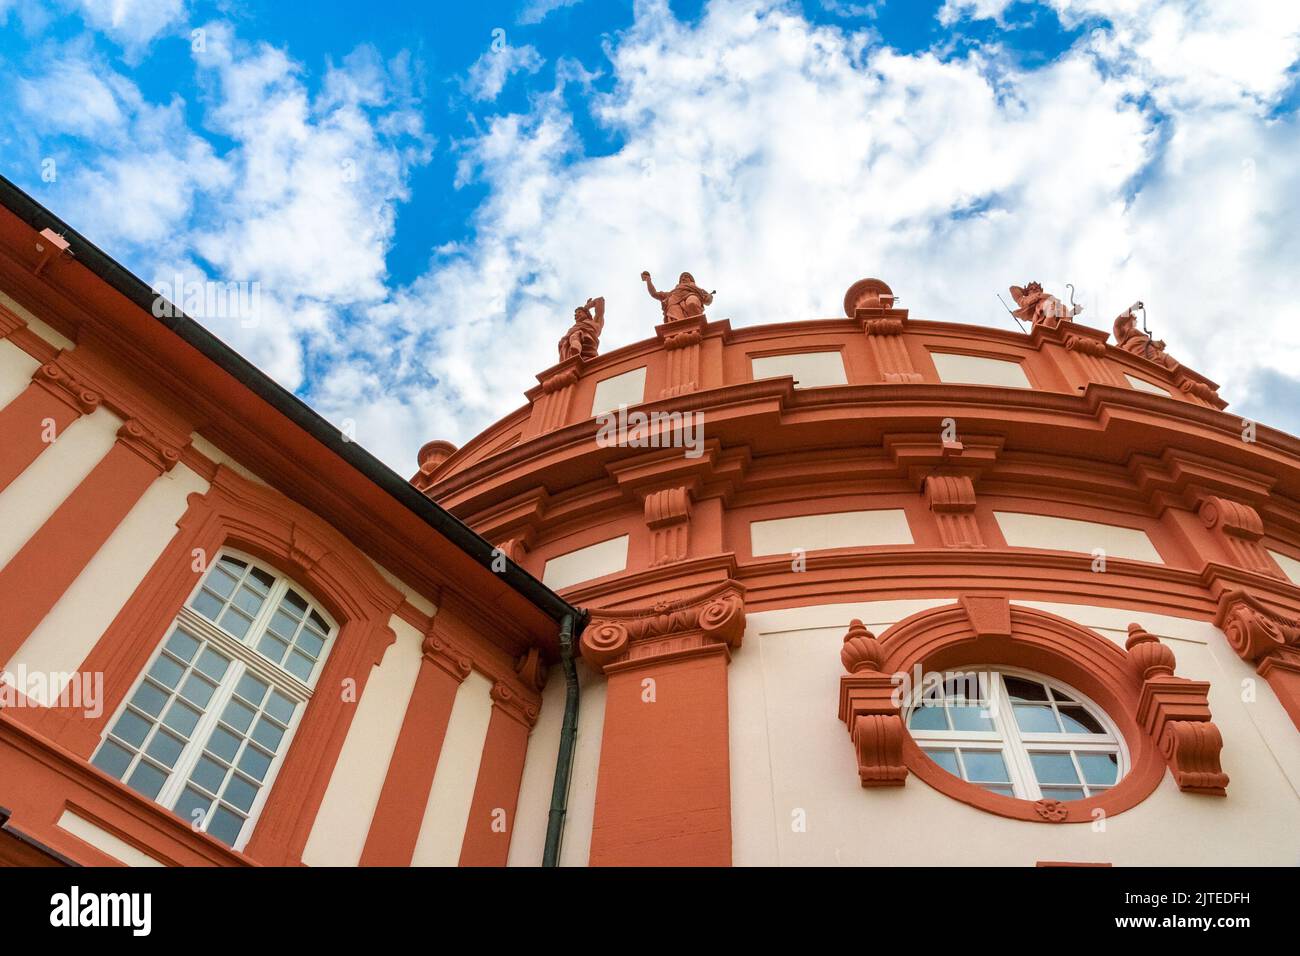 Nice low angle view of the rotunda of the famous Biebrich Palace in Wiesbaden, Germany. Crowned by statues of the gods of the ancient world, the... Stock Photo